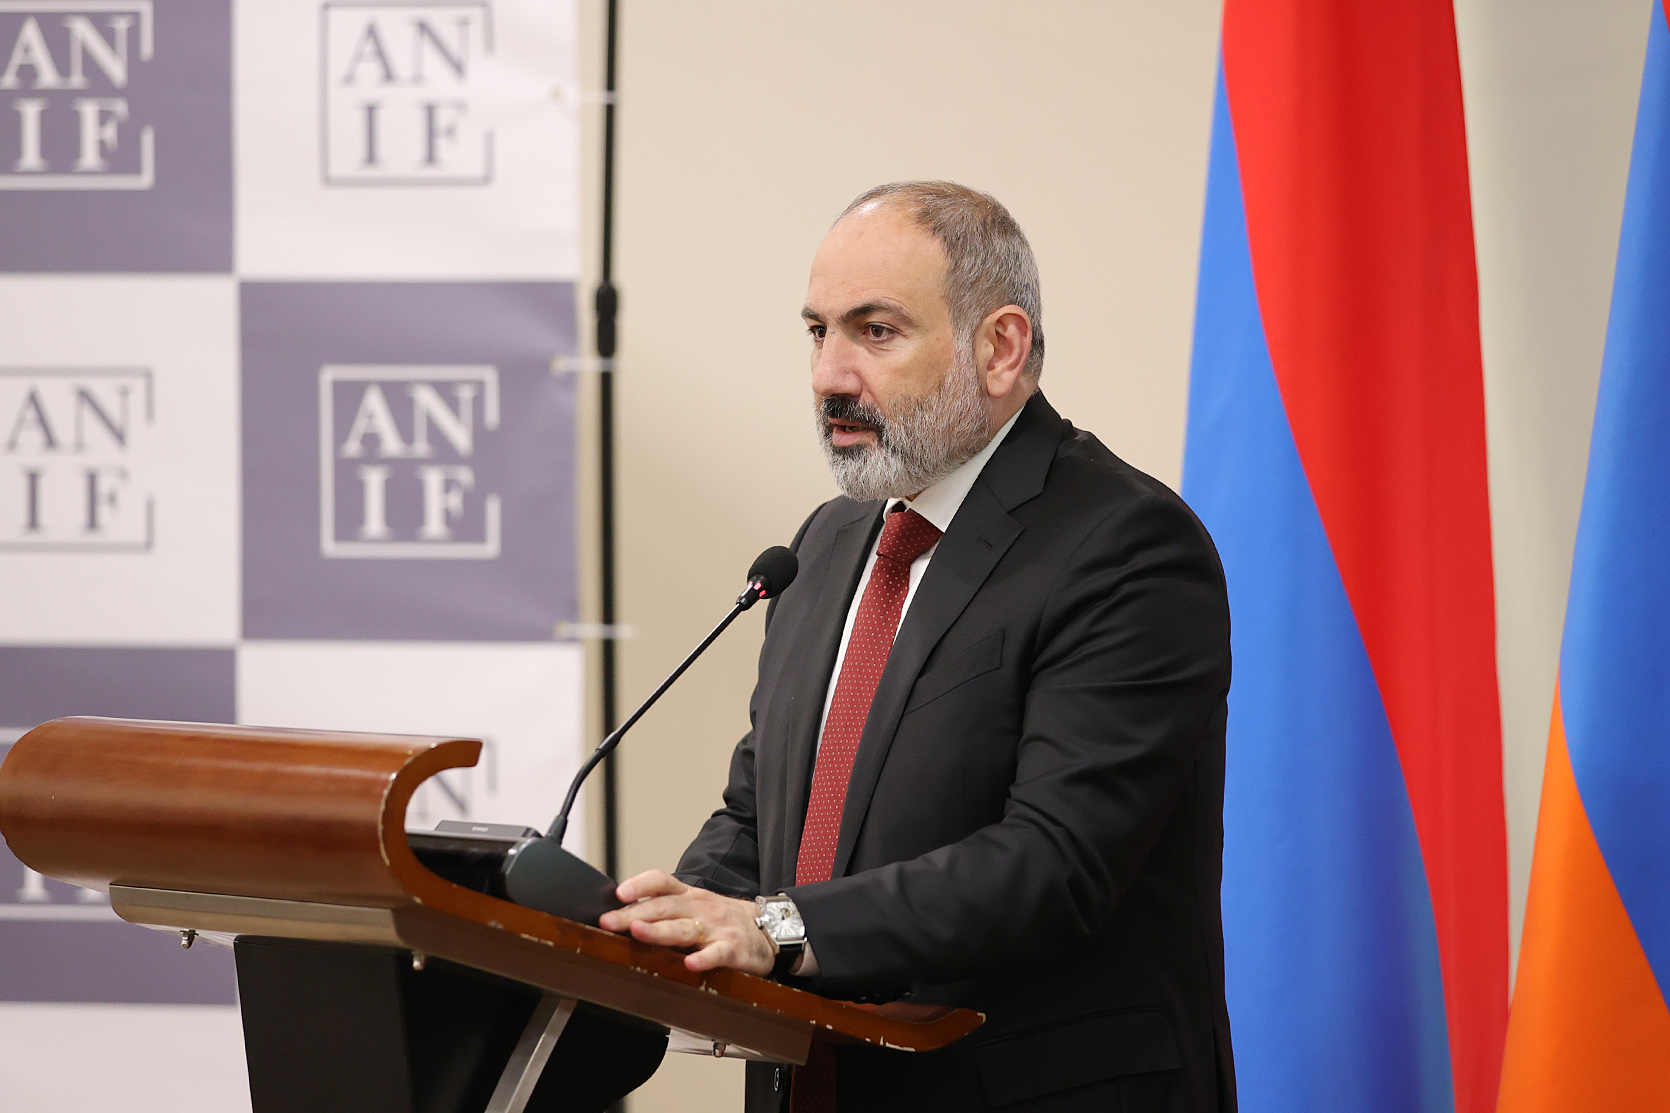 Compared to 2018, number of jobs in Armenia has increased by 123.310. The Prime Minister’s speech at the event dedicated to the activities of ANIF